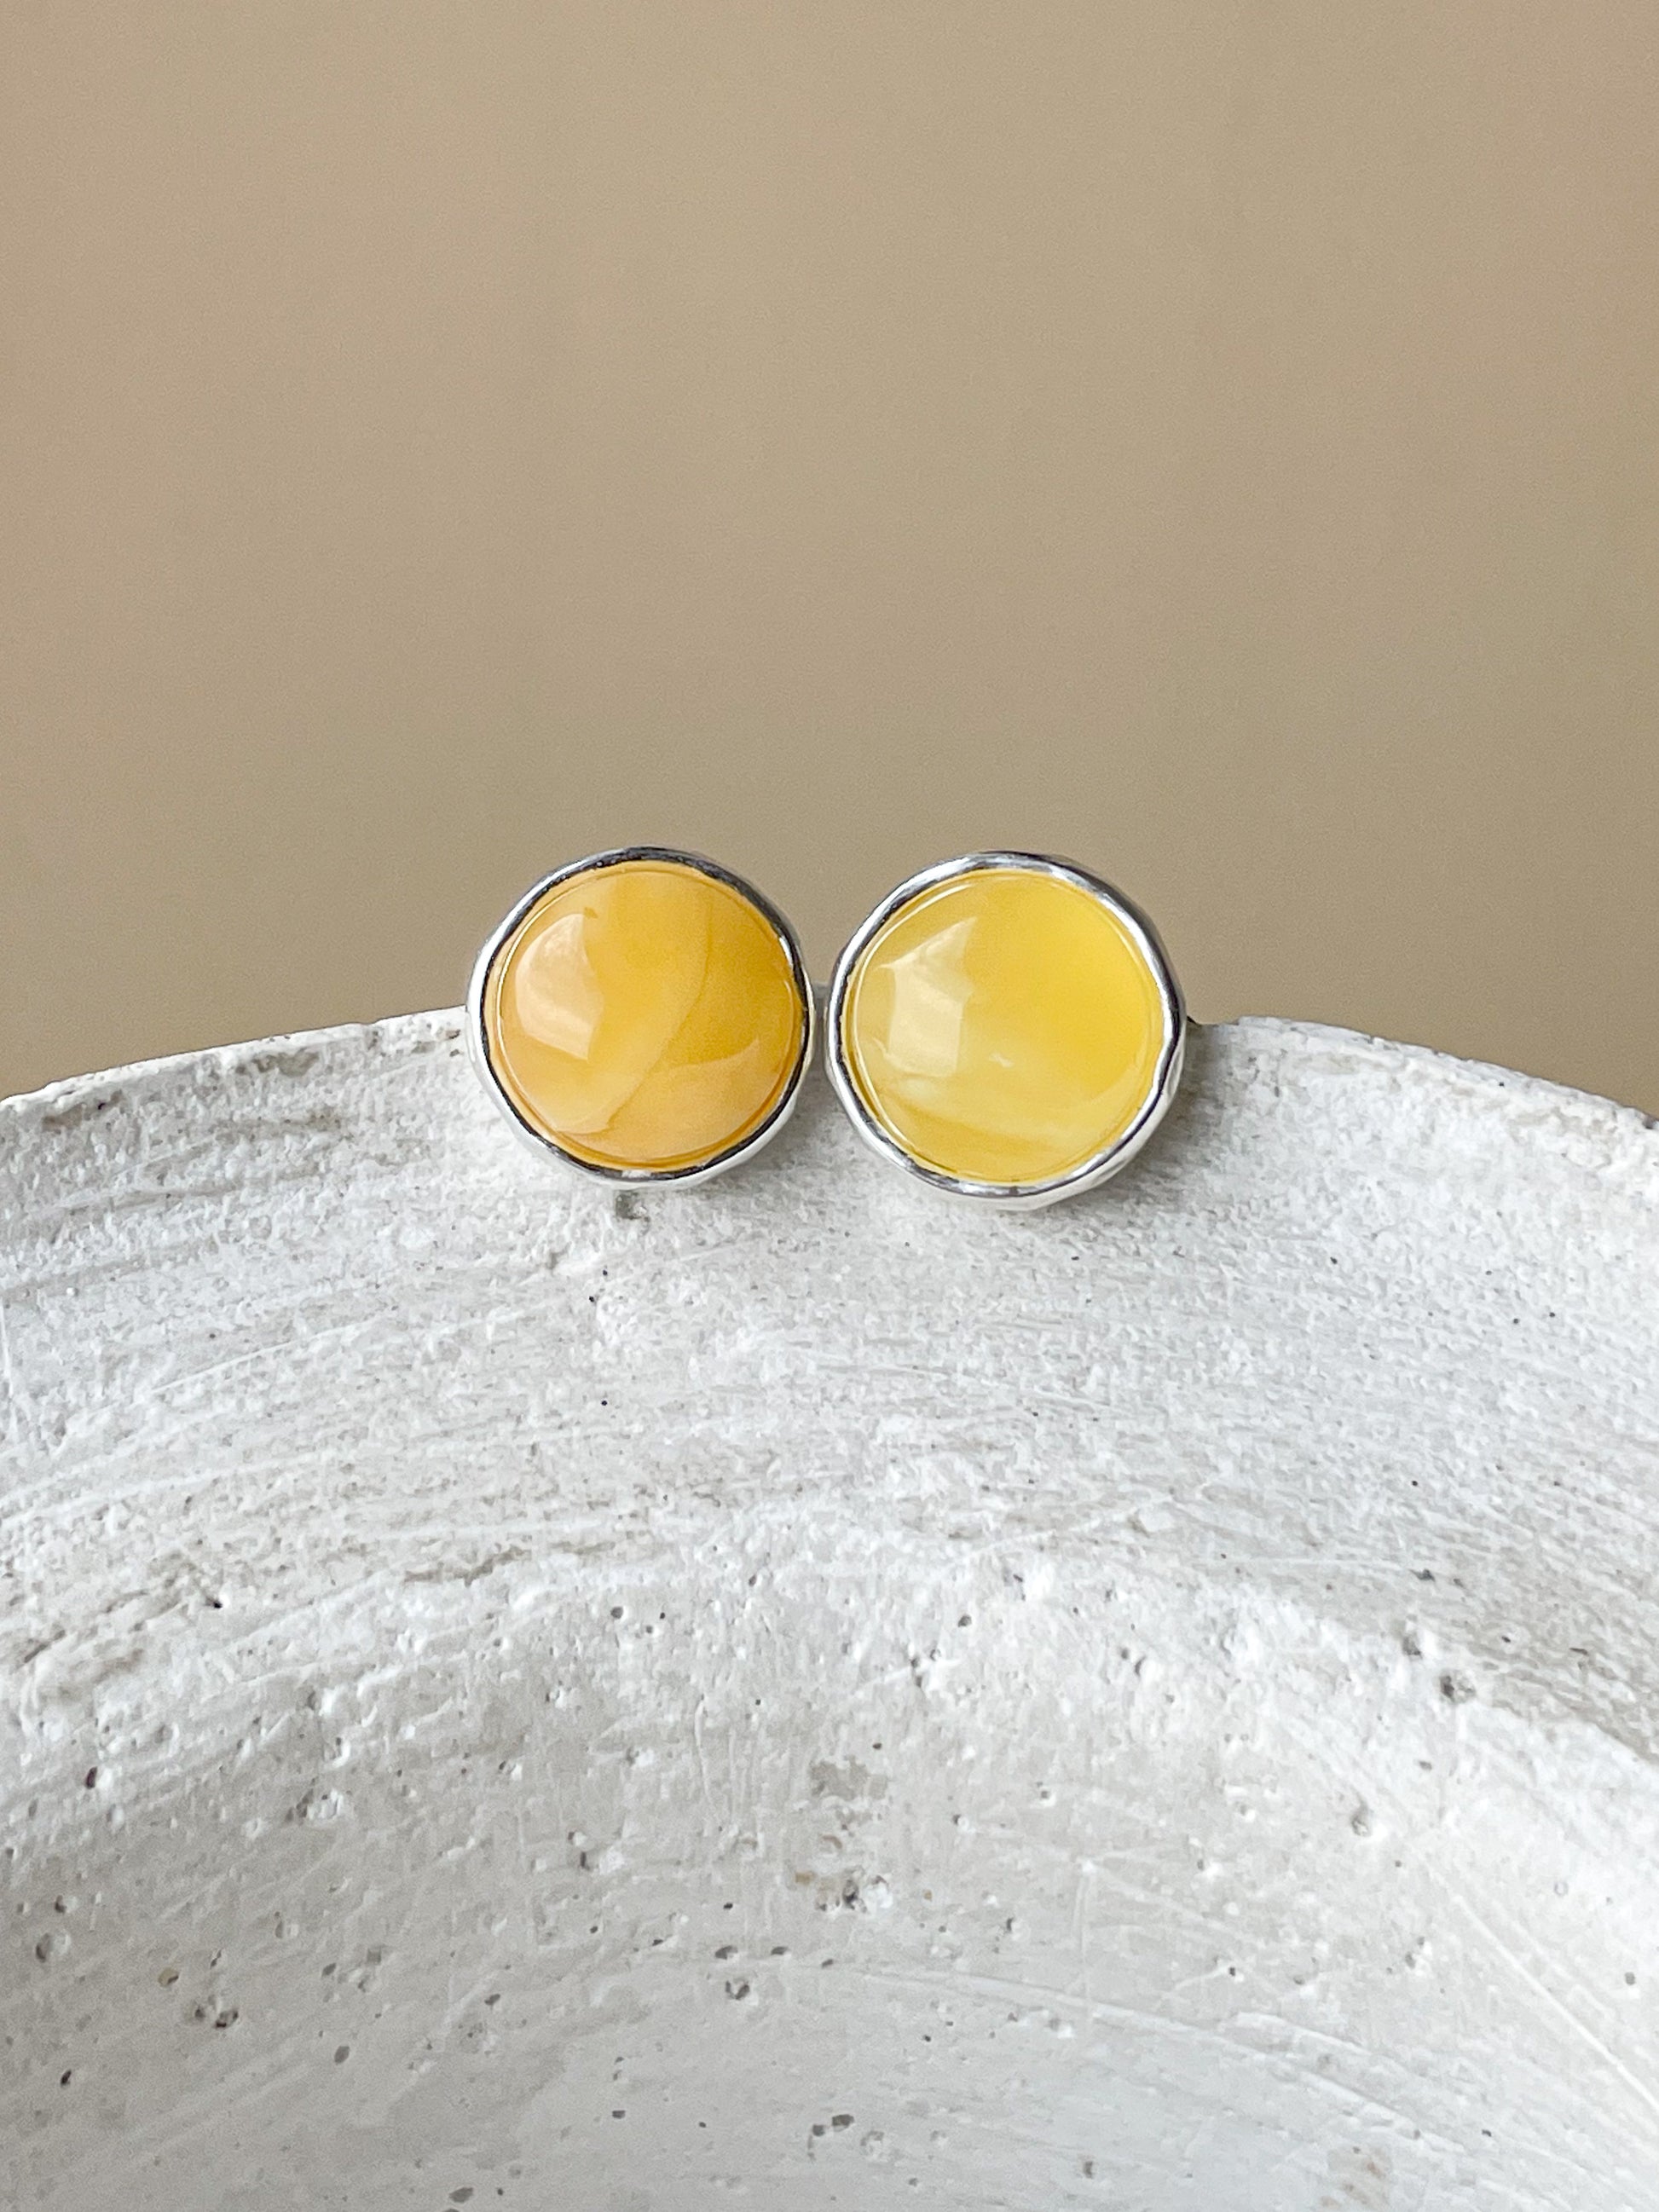 Matte amber stud earrings - Sterling silver - Classic earrings collection